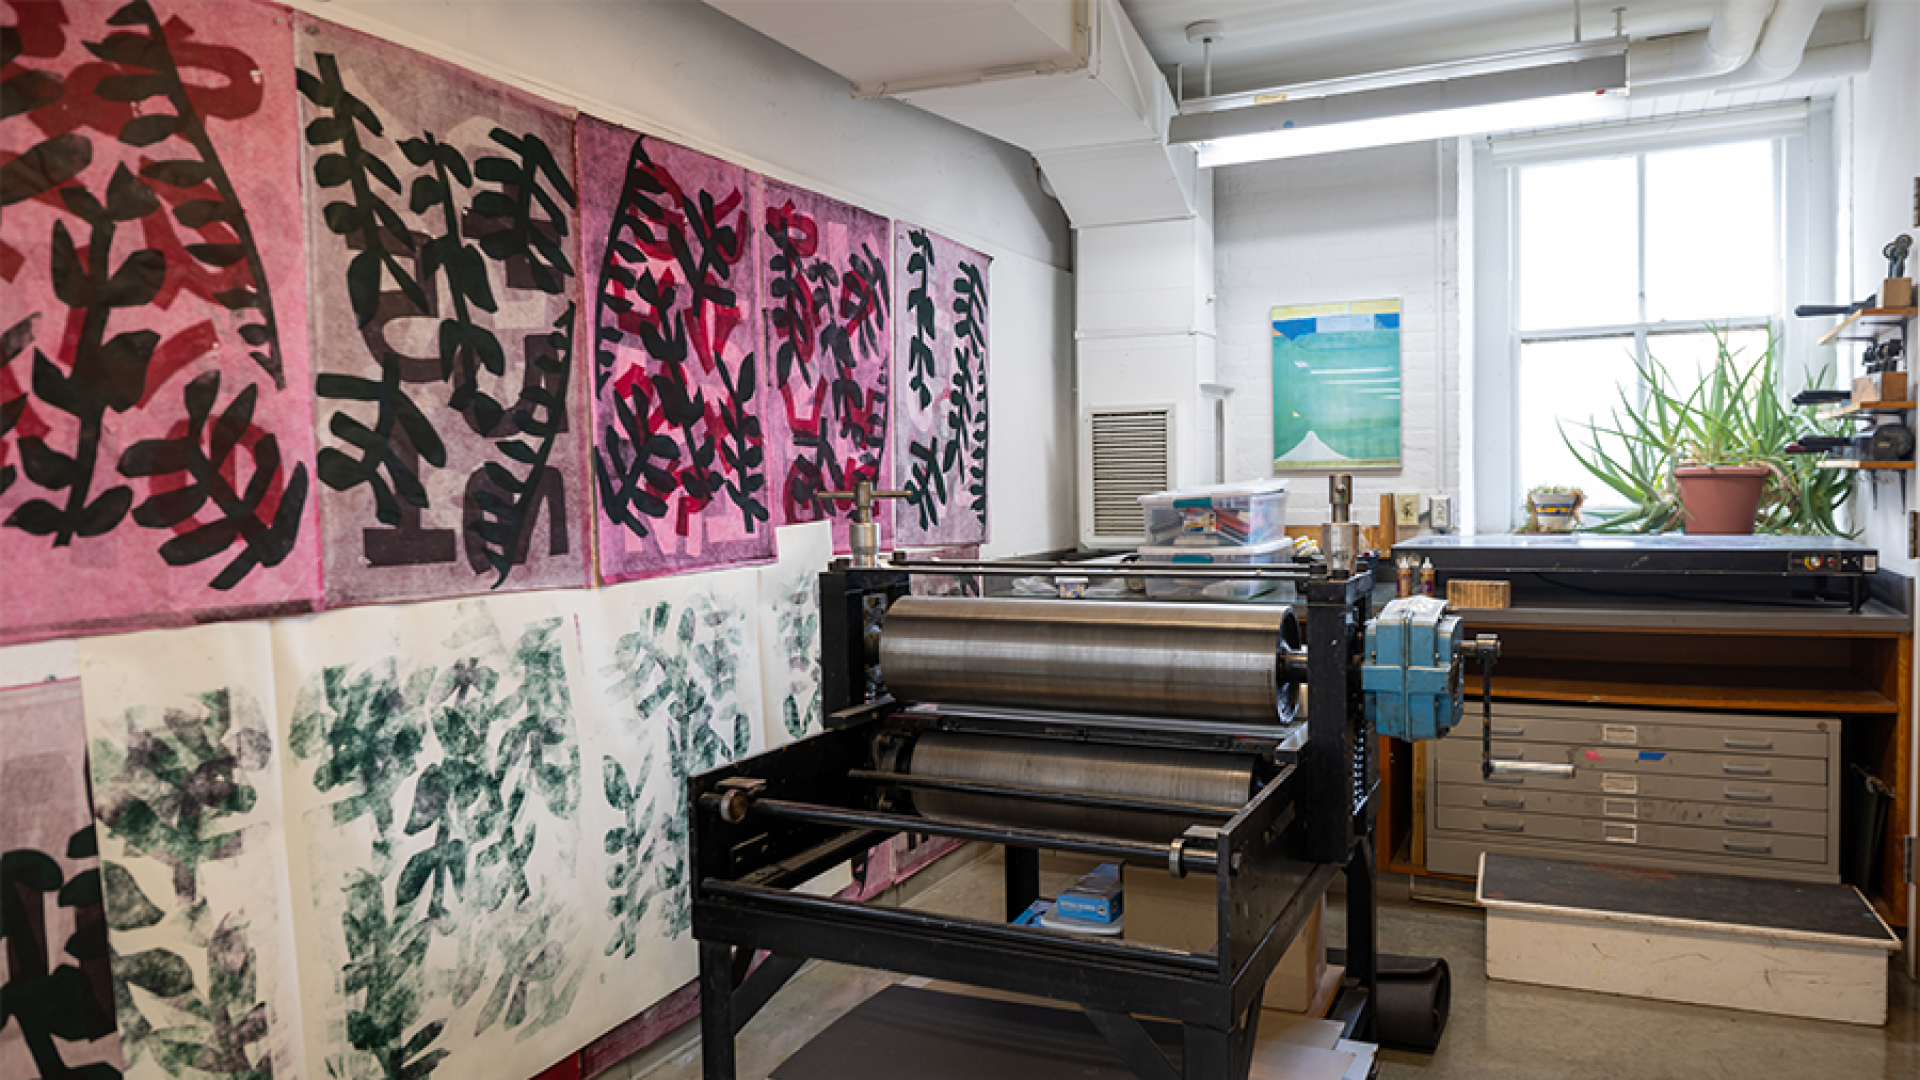 A room with artwork hung on the wall and a large press machine.